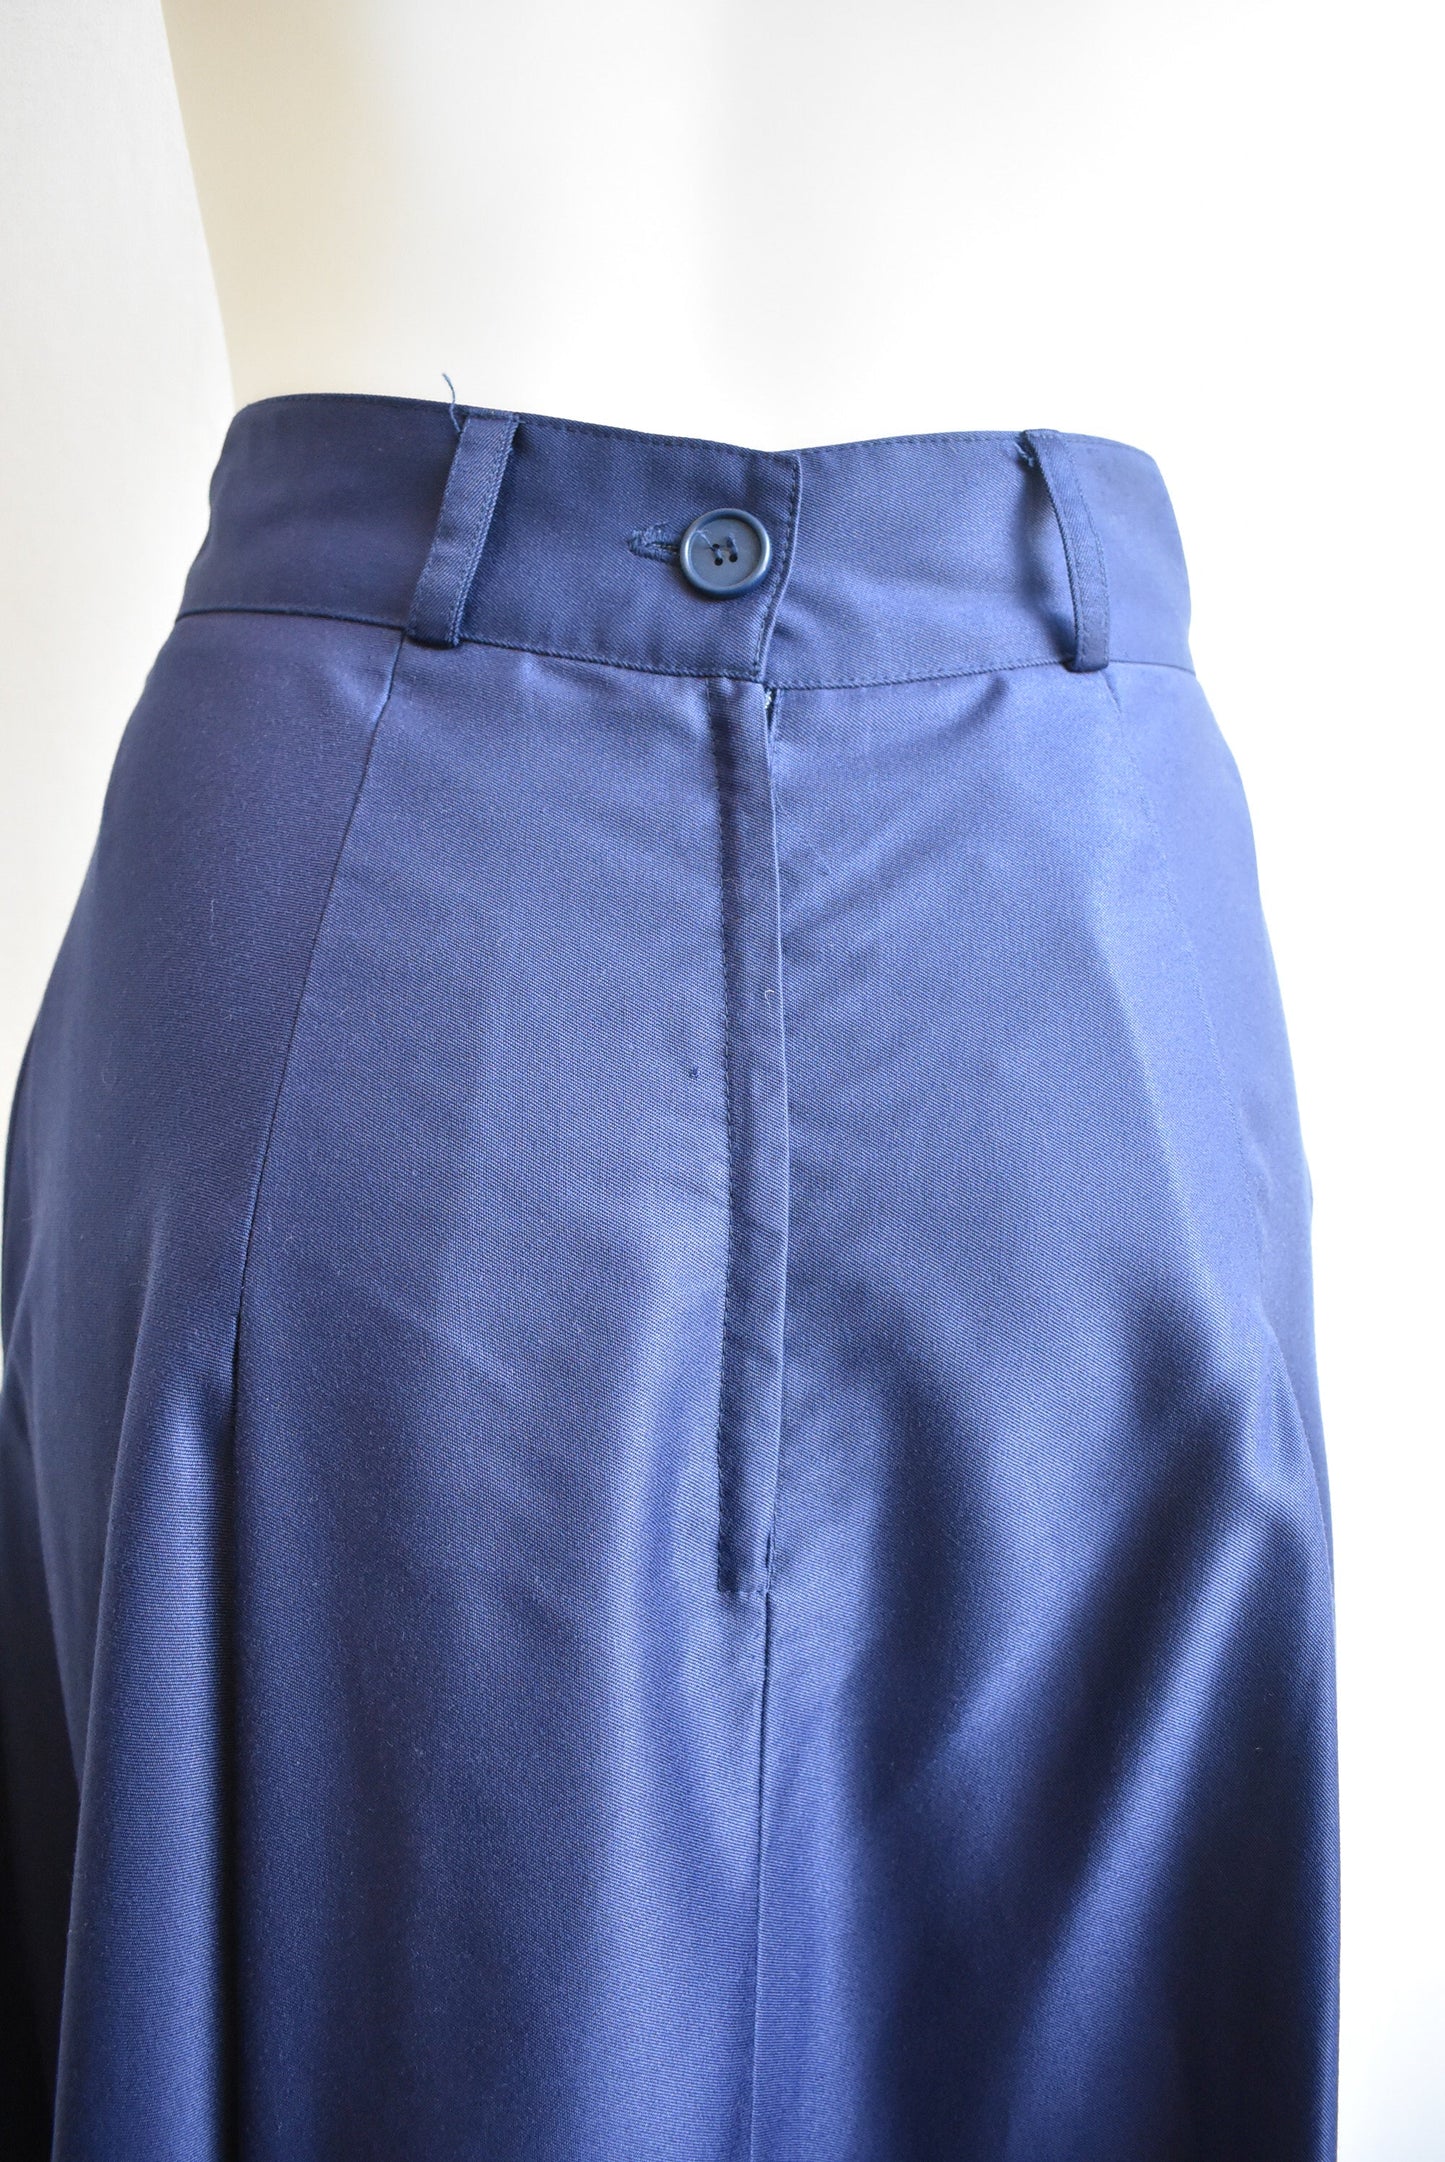 Vintage Barbara Lee pleated skirt with pockets, made in NZ. 10